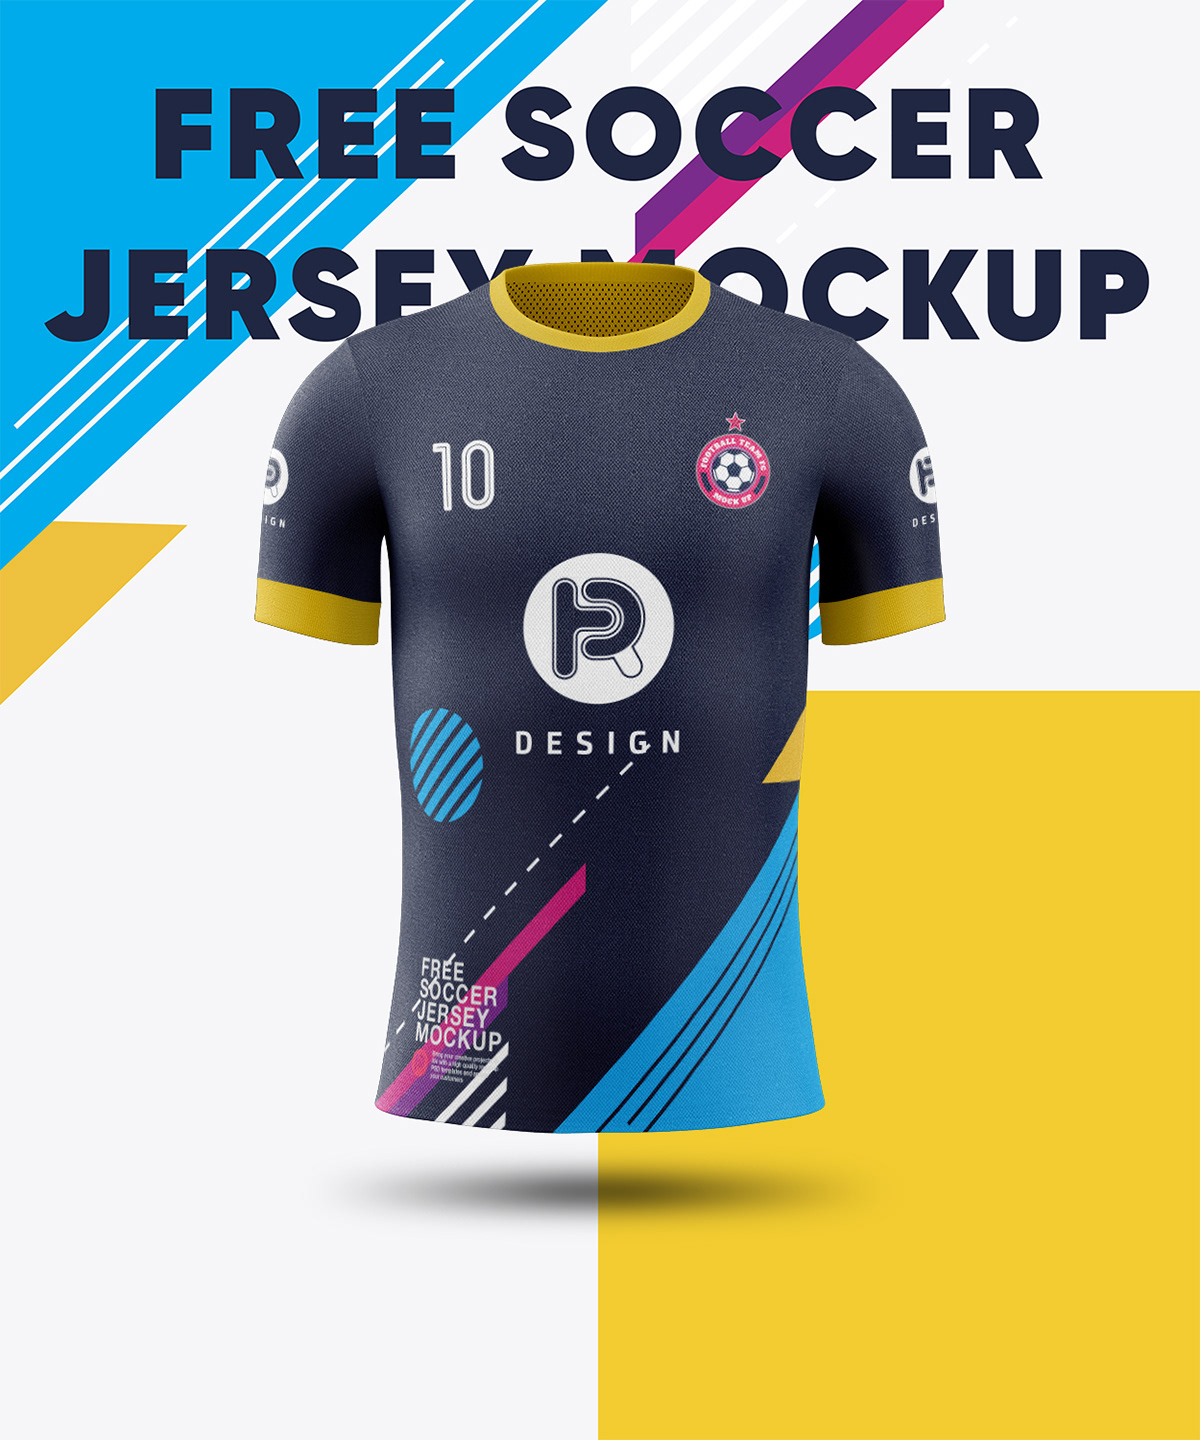 Download Free Soccer Jersey Mockup Front View On Behance